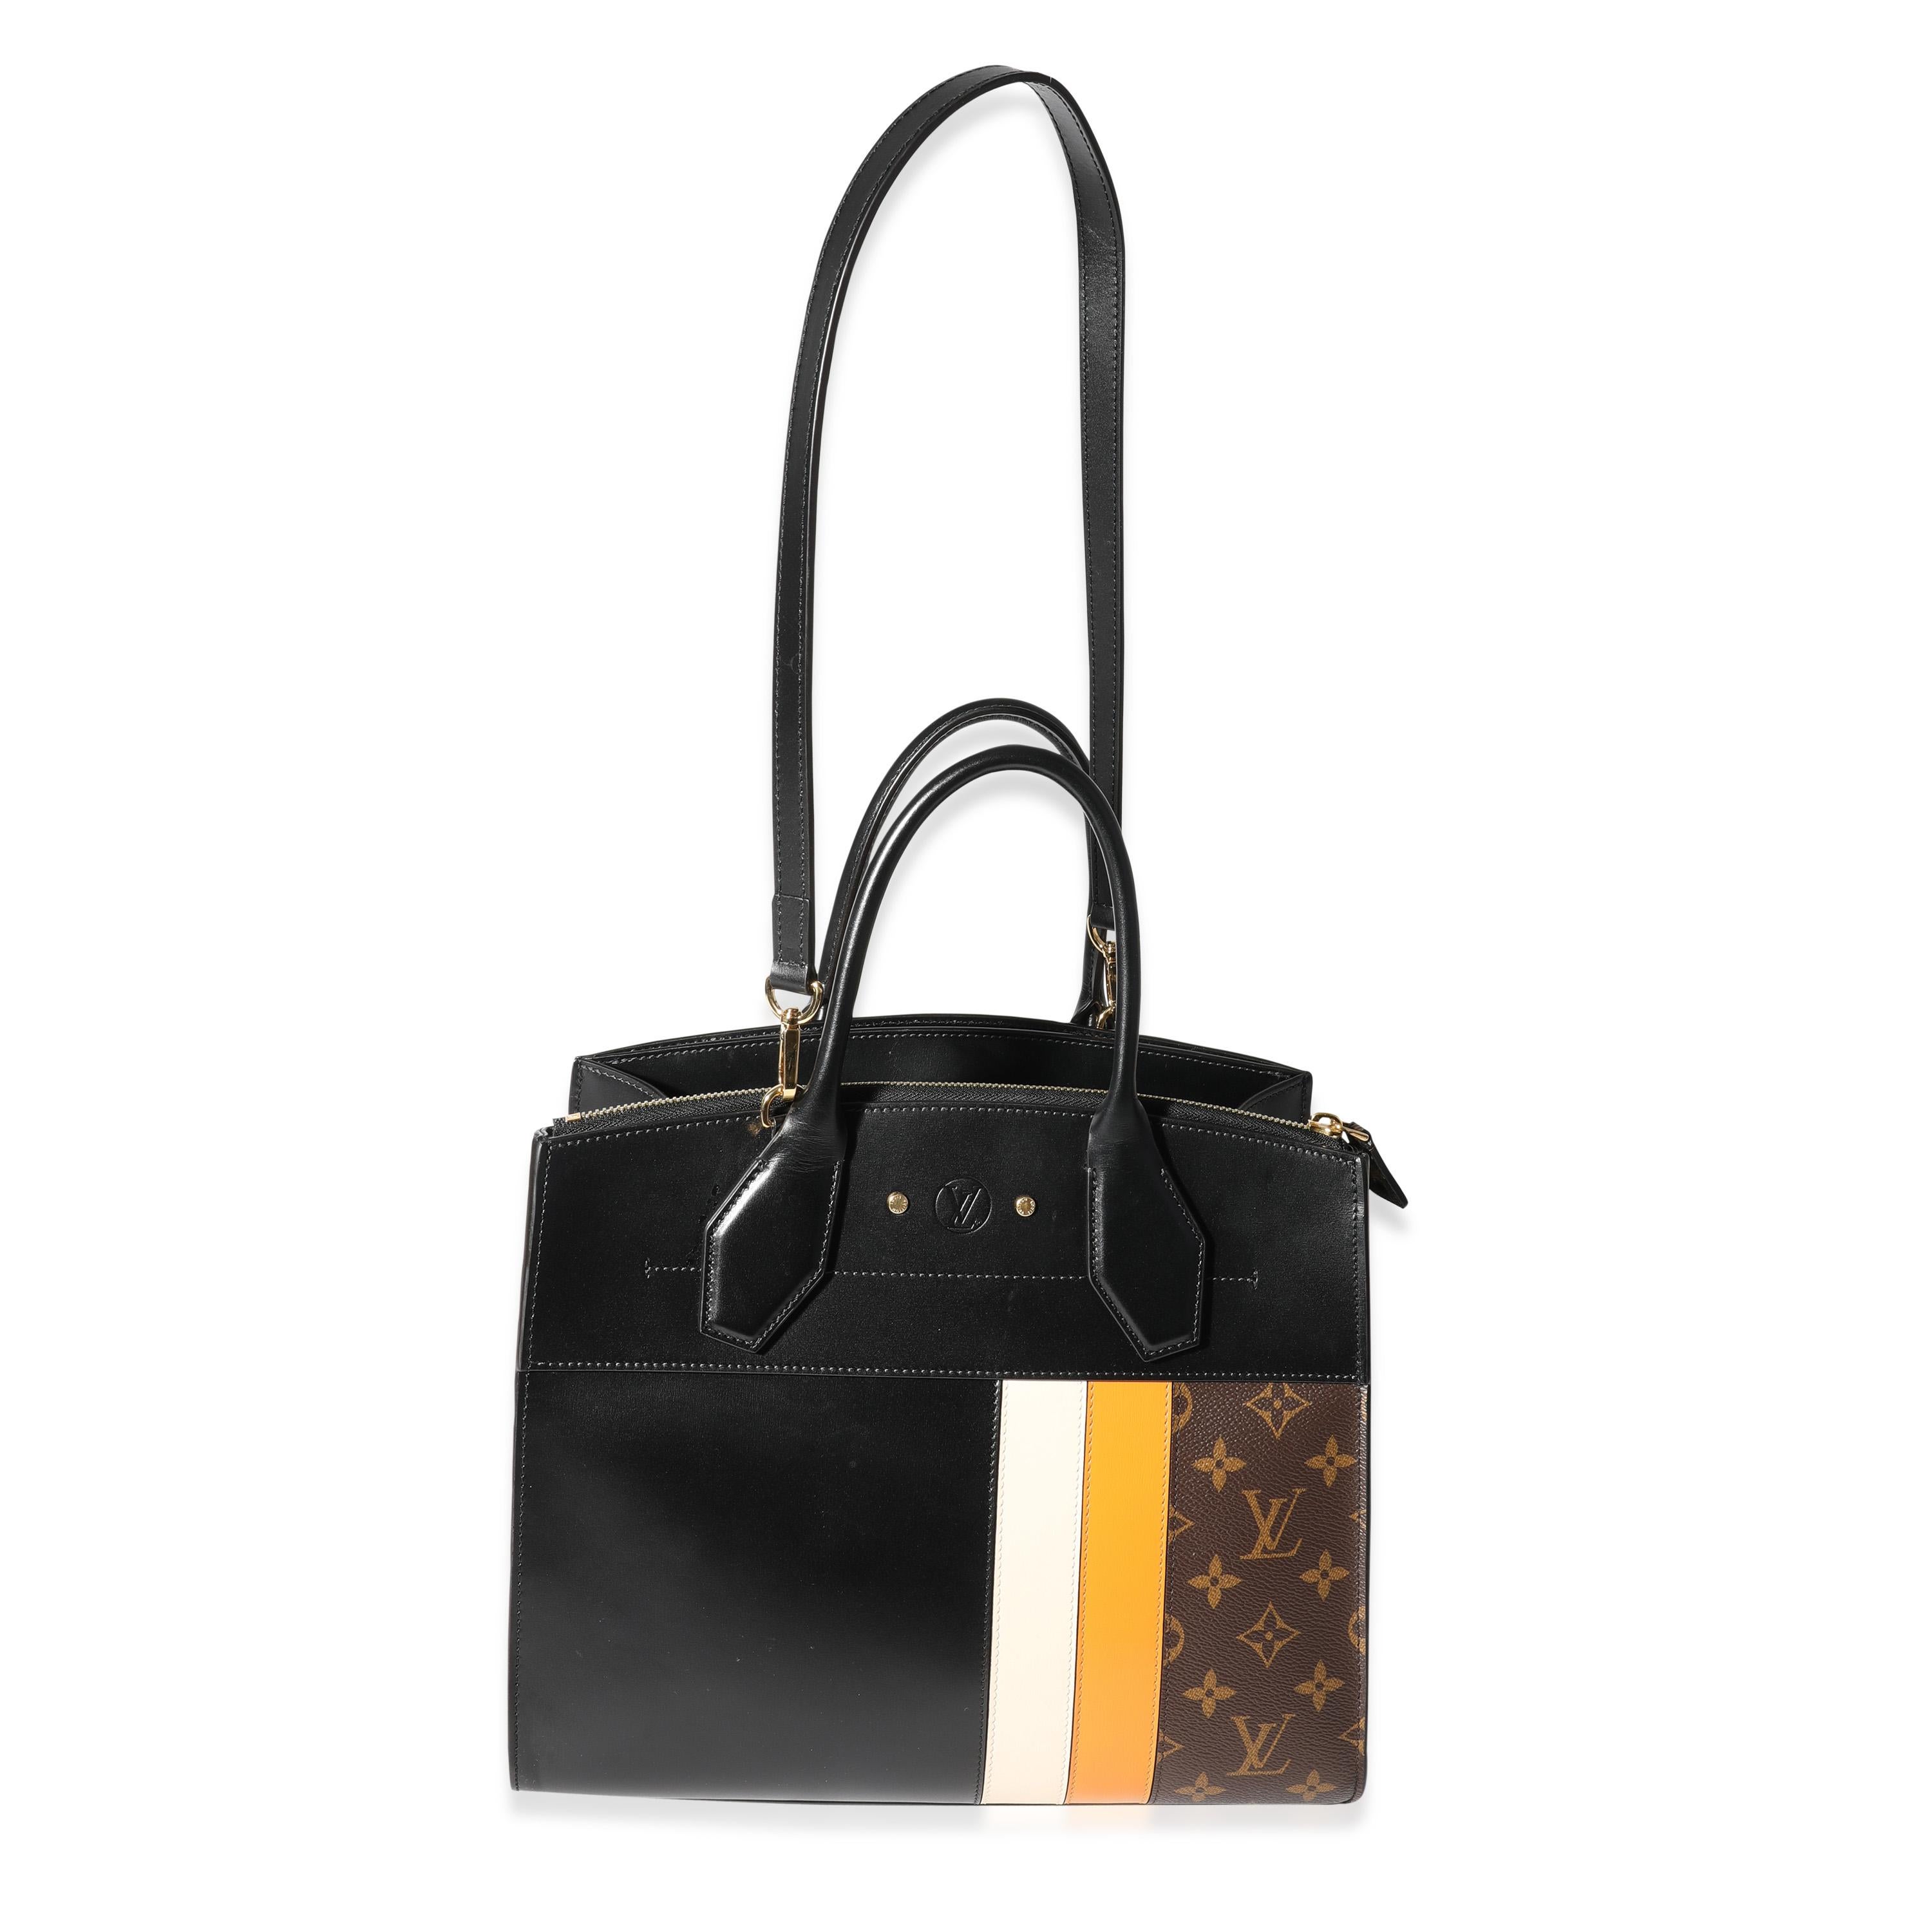 Listing Title: Louis Vuitton Black Calfskin & Monogram Canvas City Steamer MM Tote
SKU: 119740
Condition: Pre-owned (3000)
Handbag Condition: Excellent
Condition Comments: Scratches on exterior and interior leather. Wear to feet.
Brand: Louis